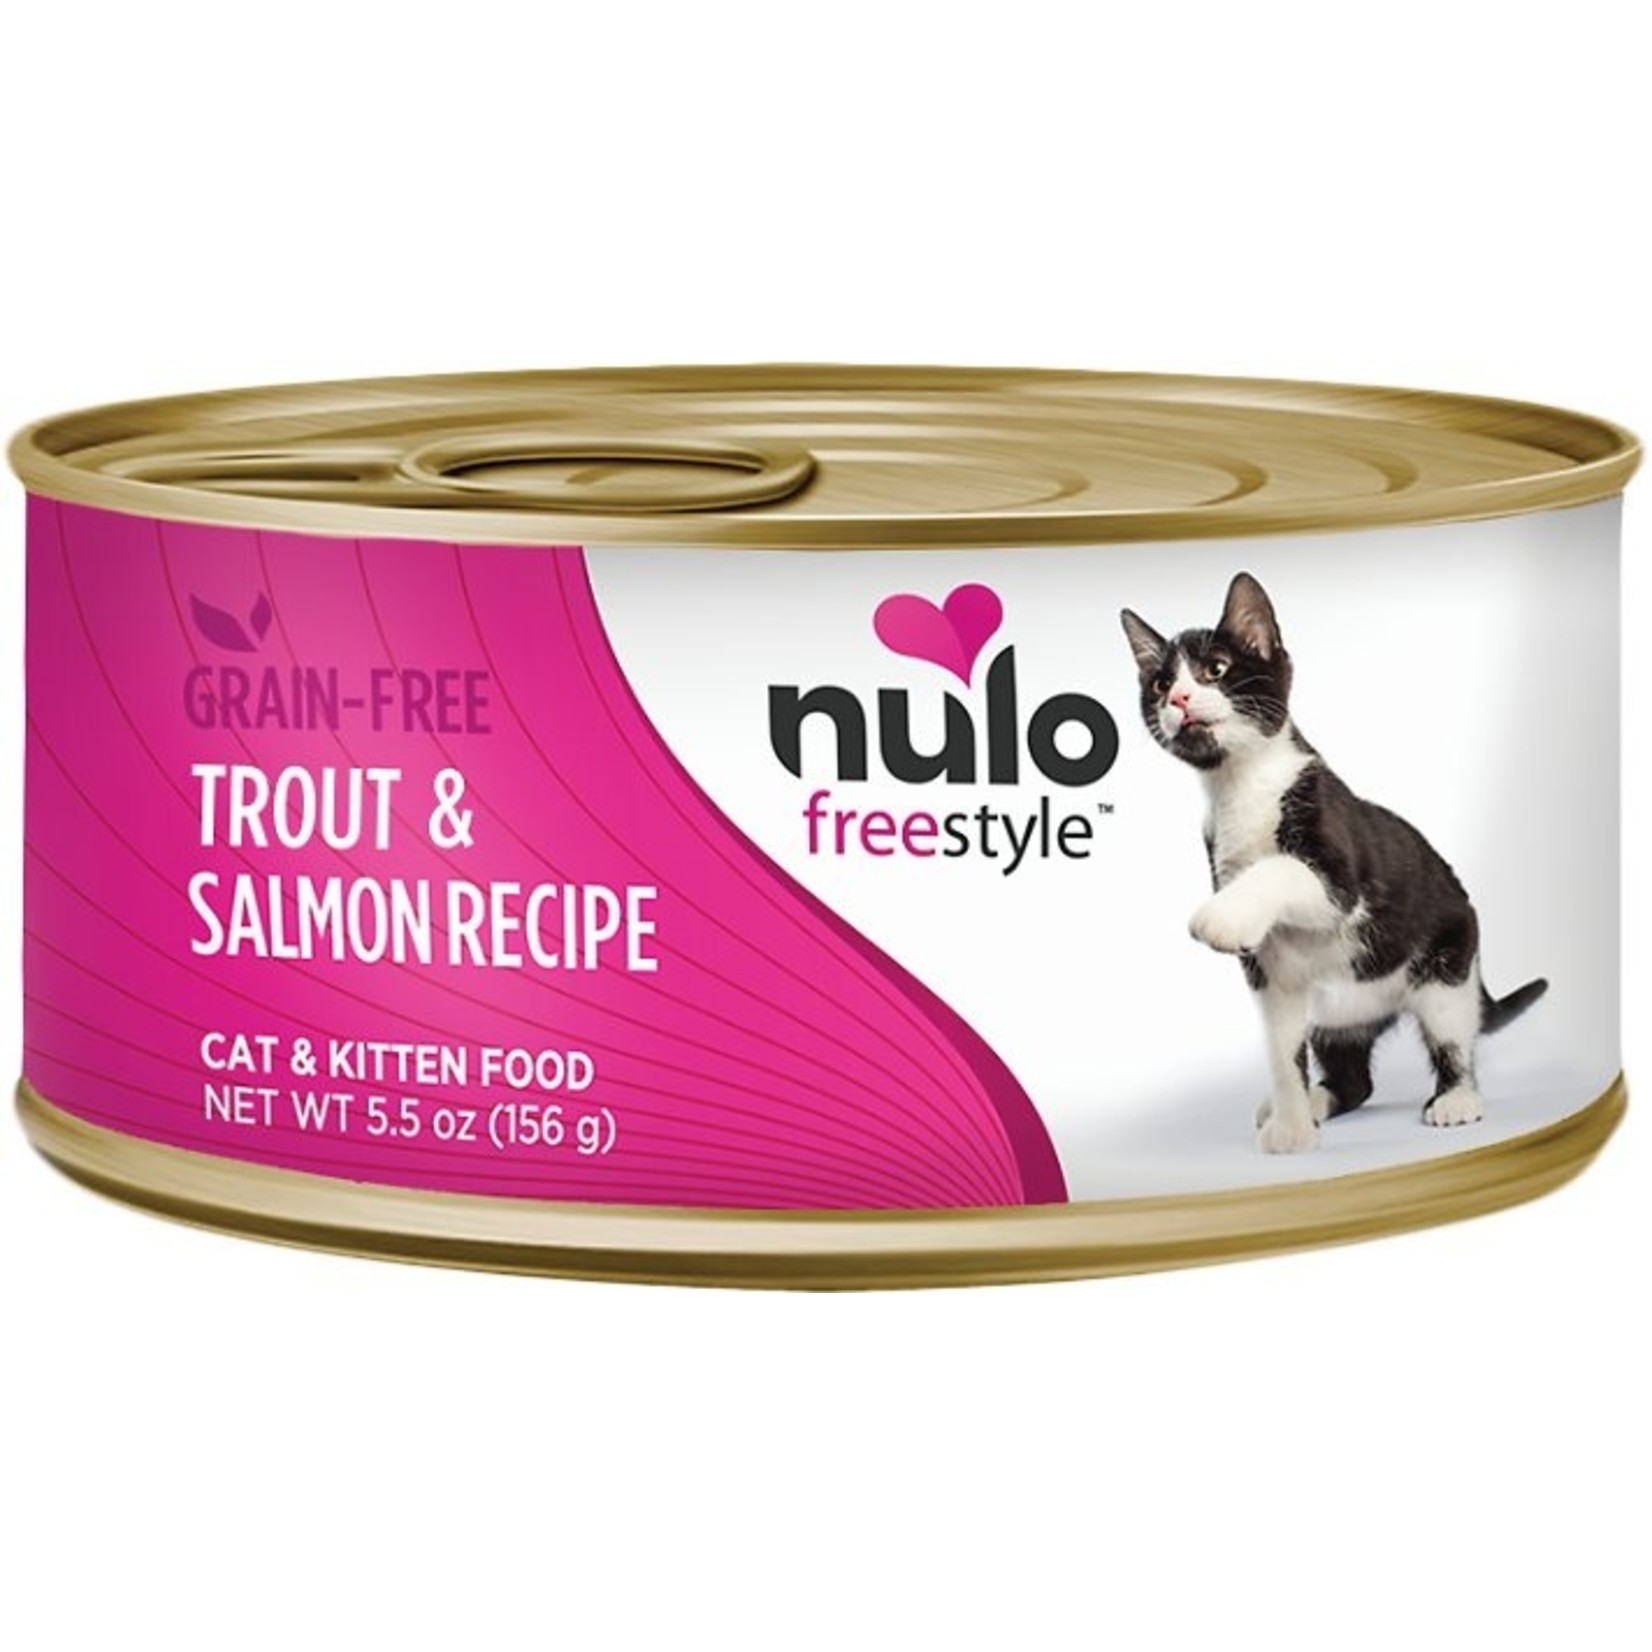 Nulo Nulo Freestyle Wet Cat Food Trout & Salmon Recipe Pate 5.5oz Can Grain Free